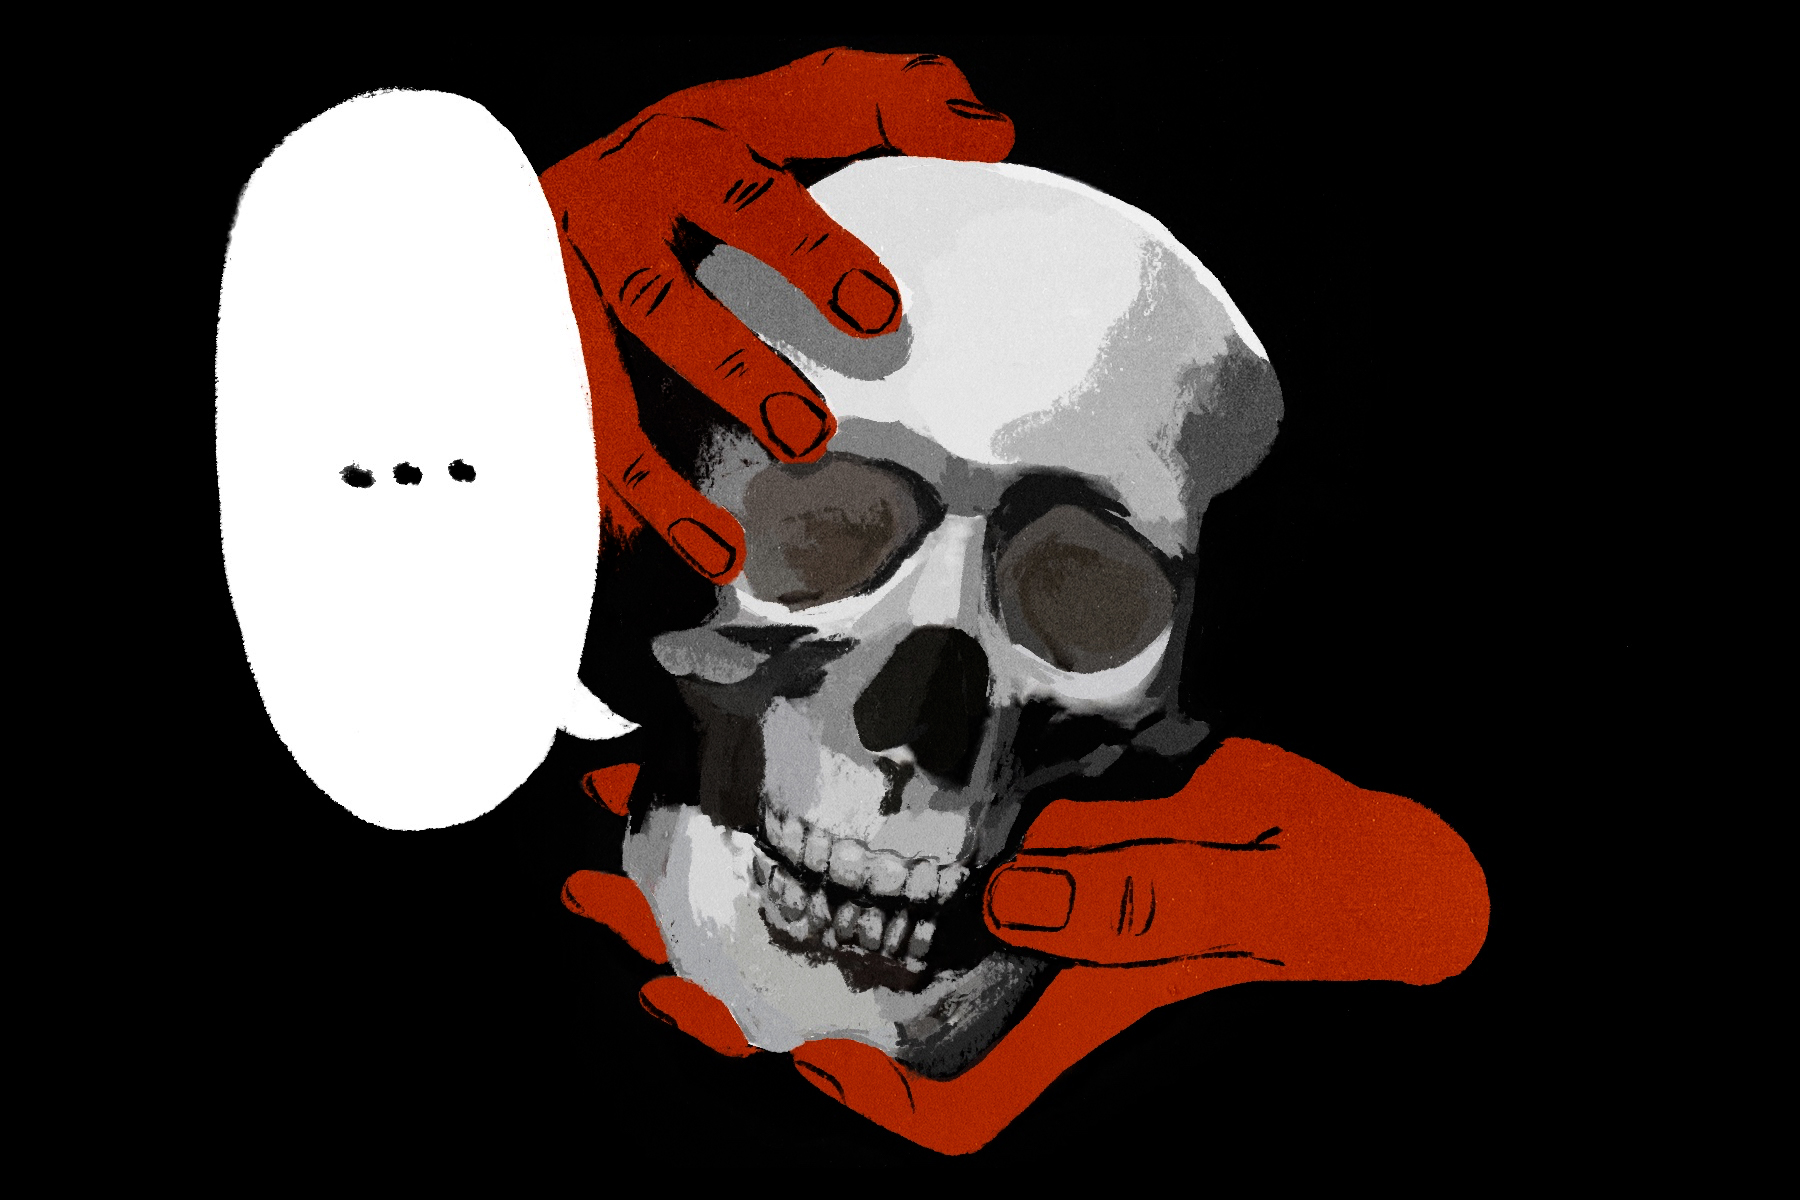 An illustration of a skull, positioned between two hands, with a speech bubble